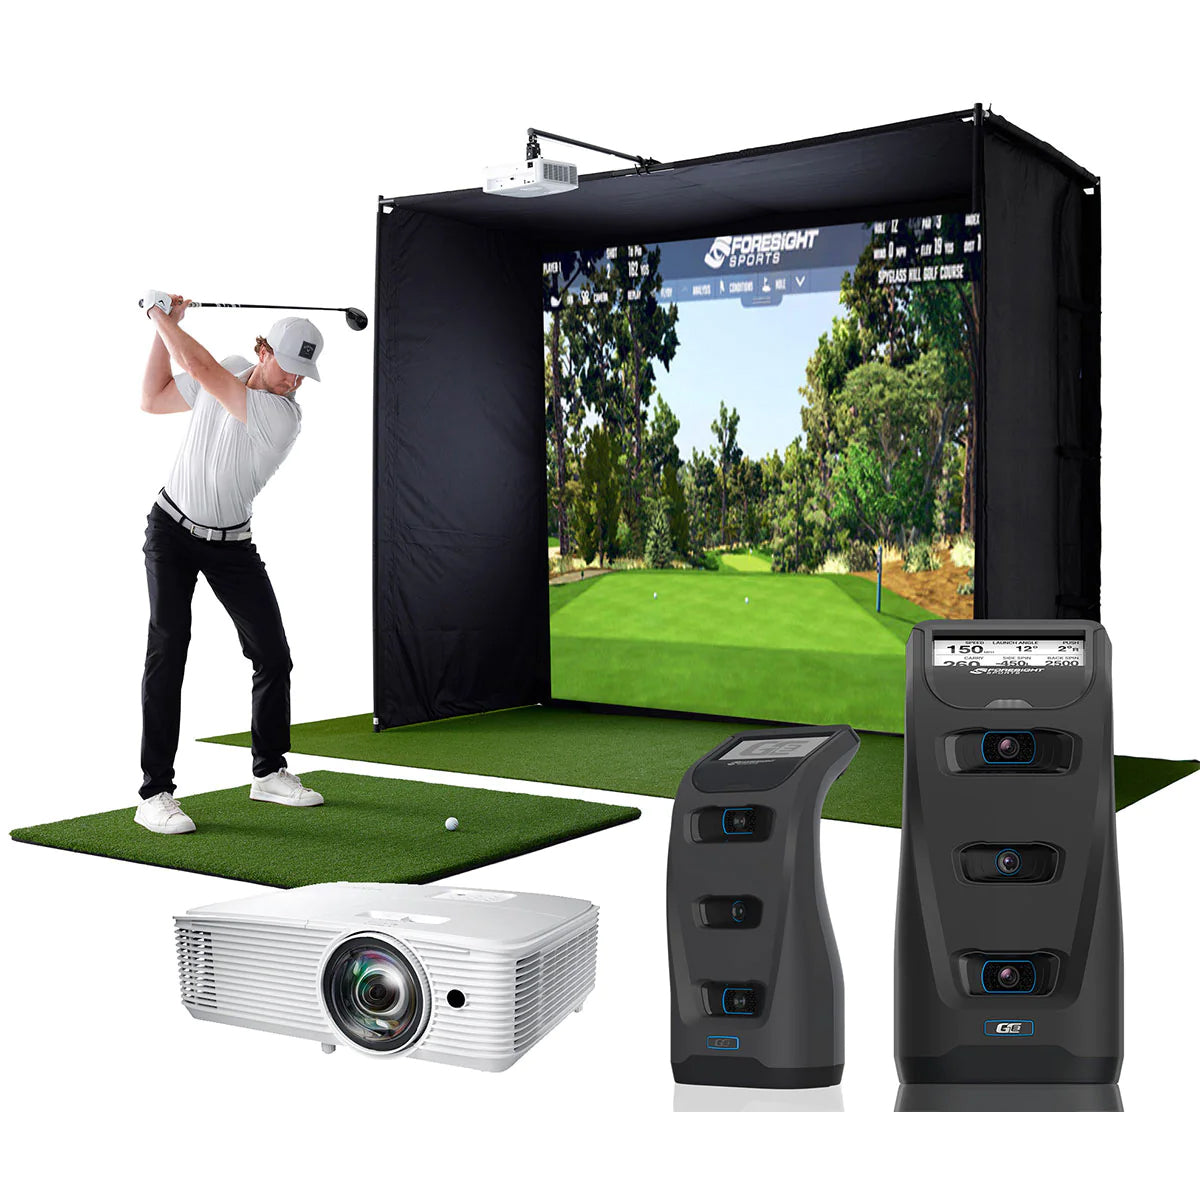 A golfer in the PlayBetter SimStudio with gaming projector and 2 images of the Foresight Sports GC3 in the foreground